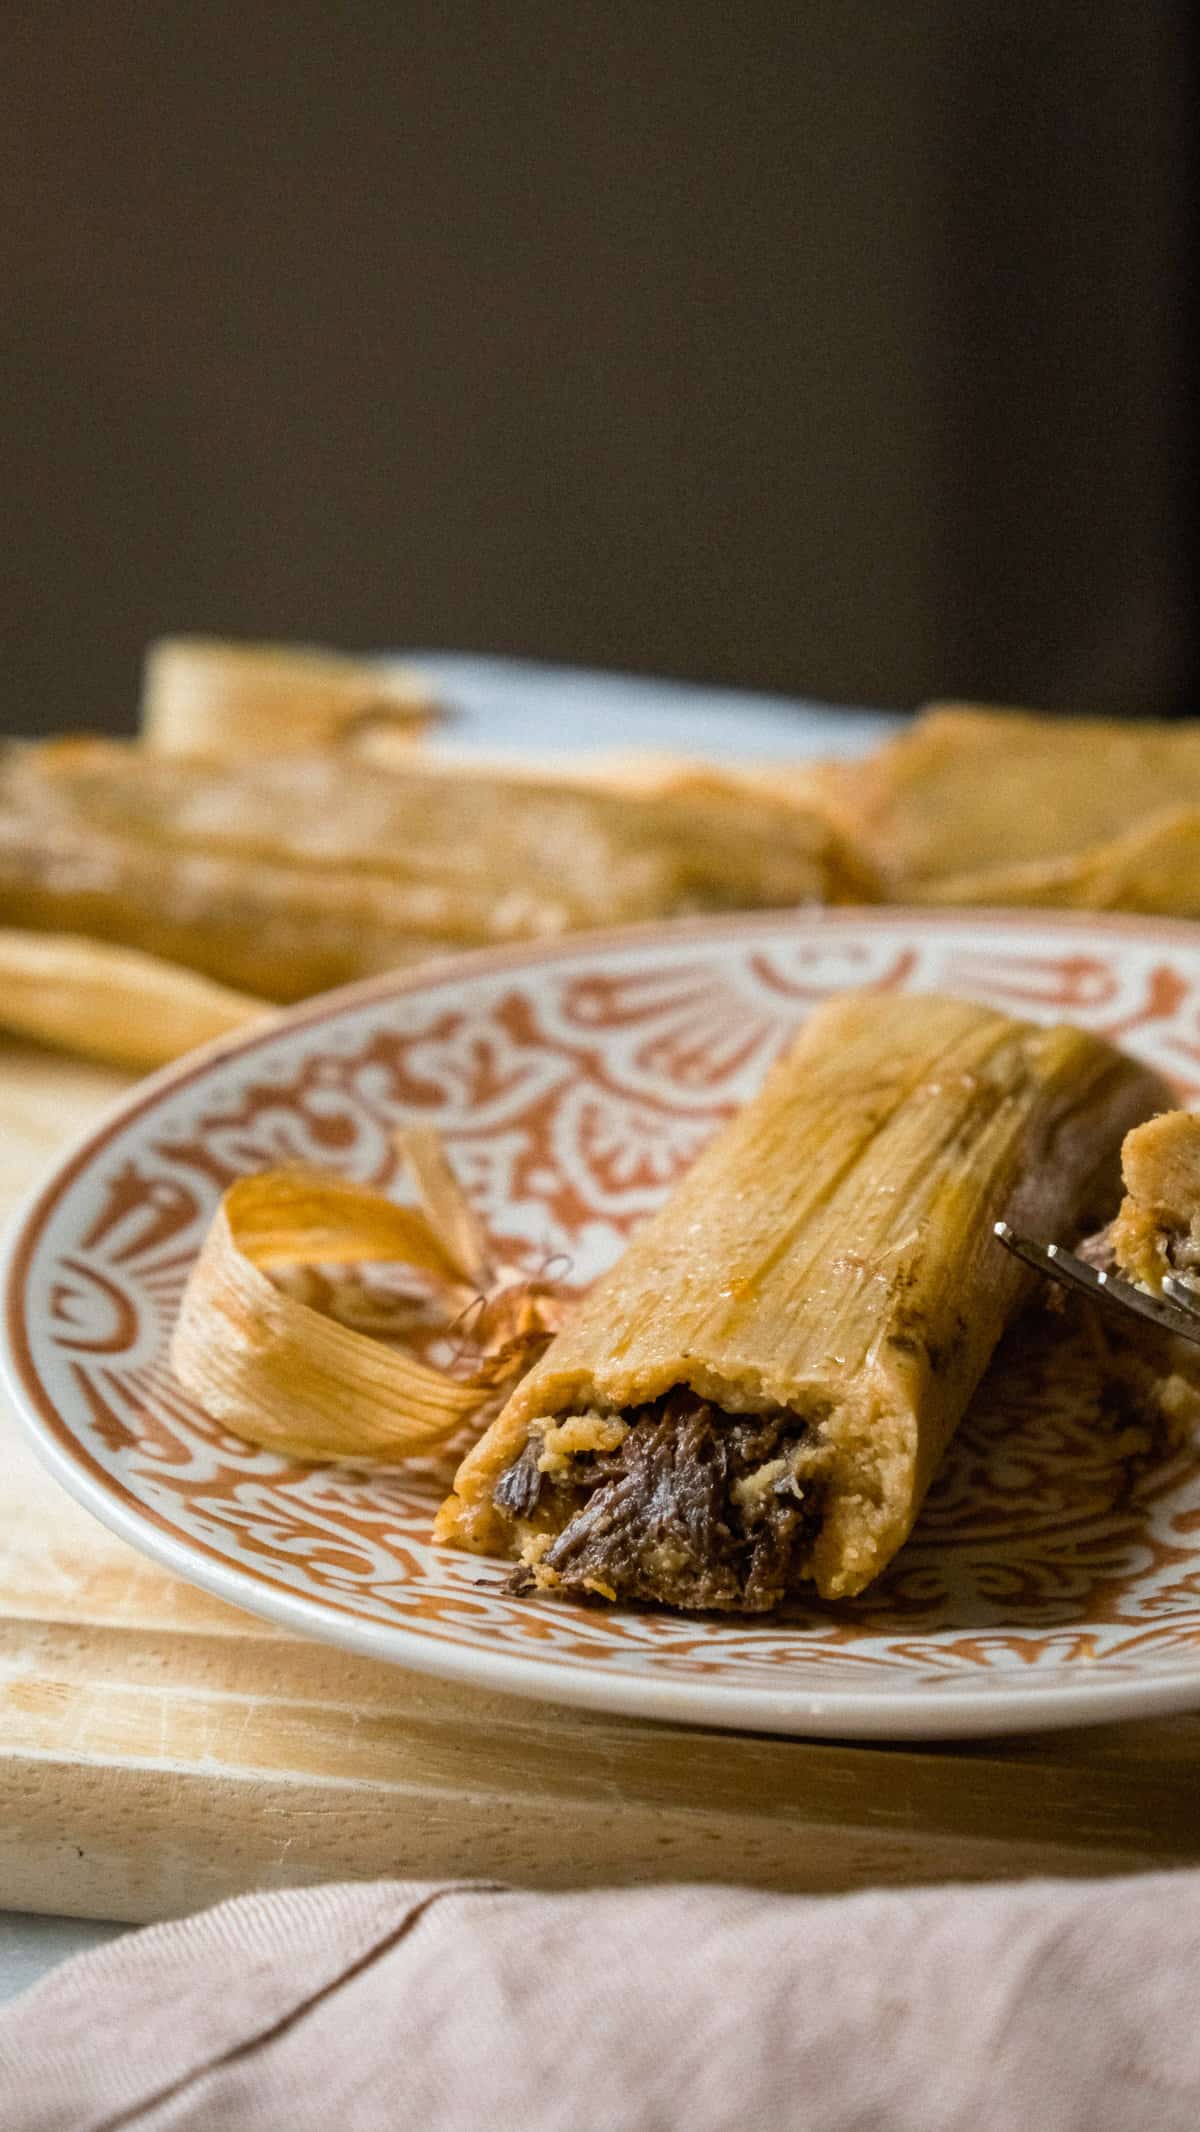 Meat in tamales